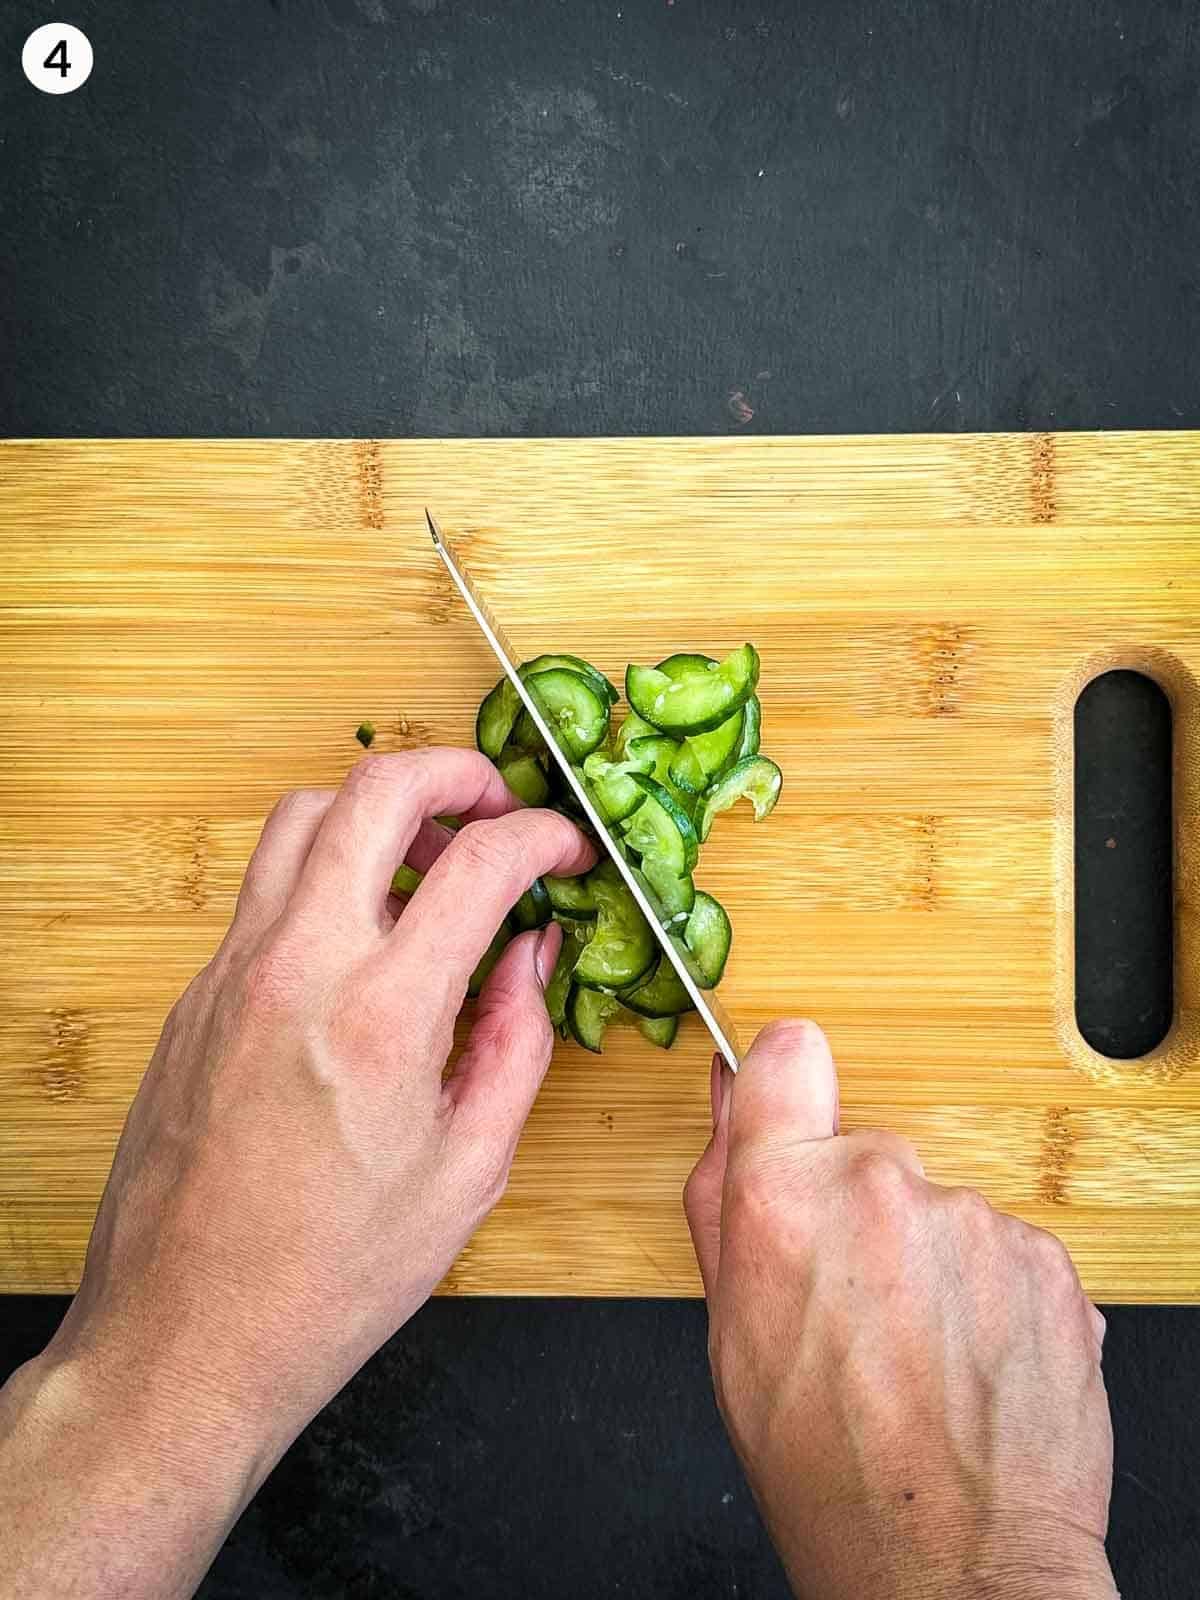 Chopping sliced cucumbers with a knife on a wooden chopping board